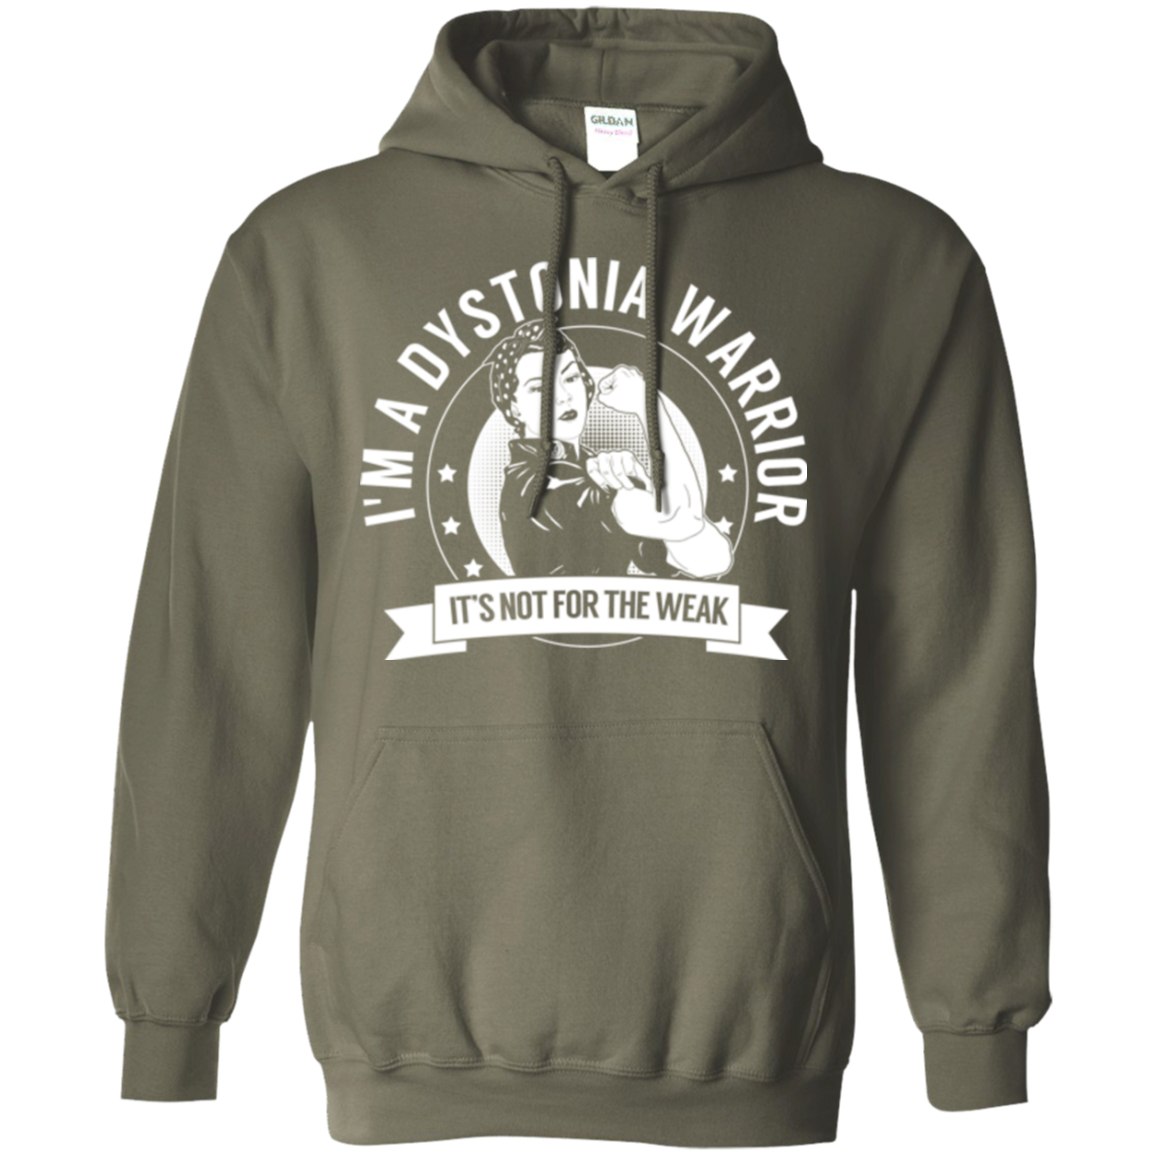 Dystonia Warrior Not For The Weak Pullover Hoodie 8 oz. - The Unchargeables